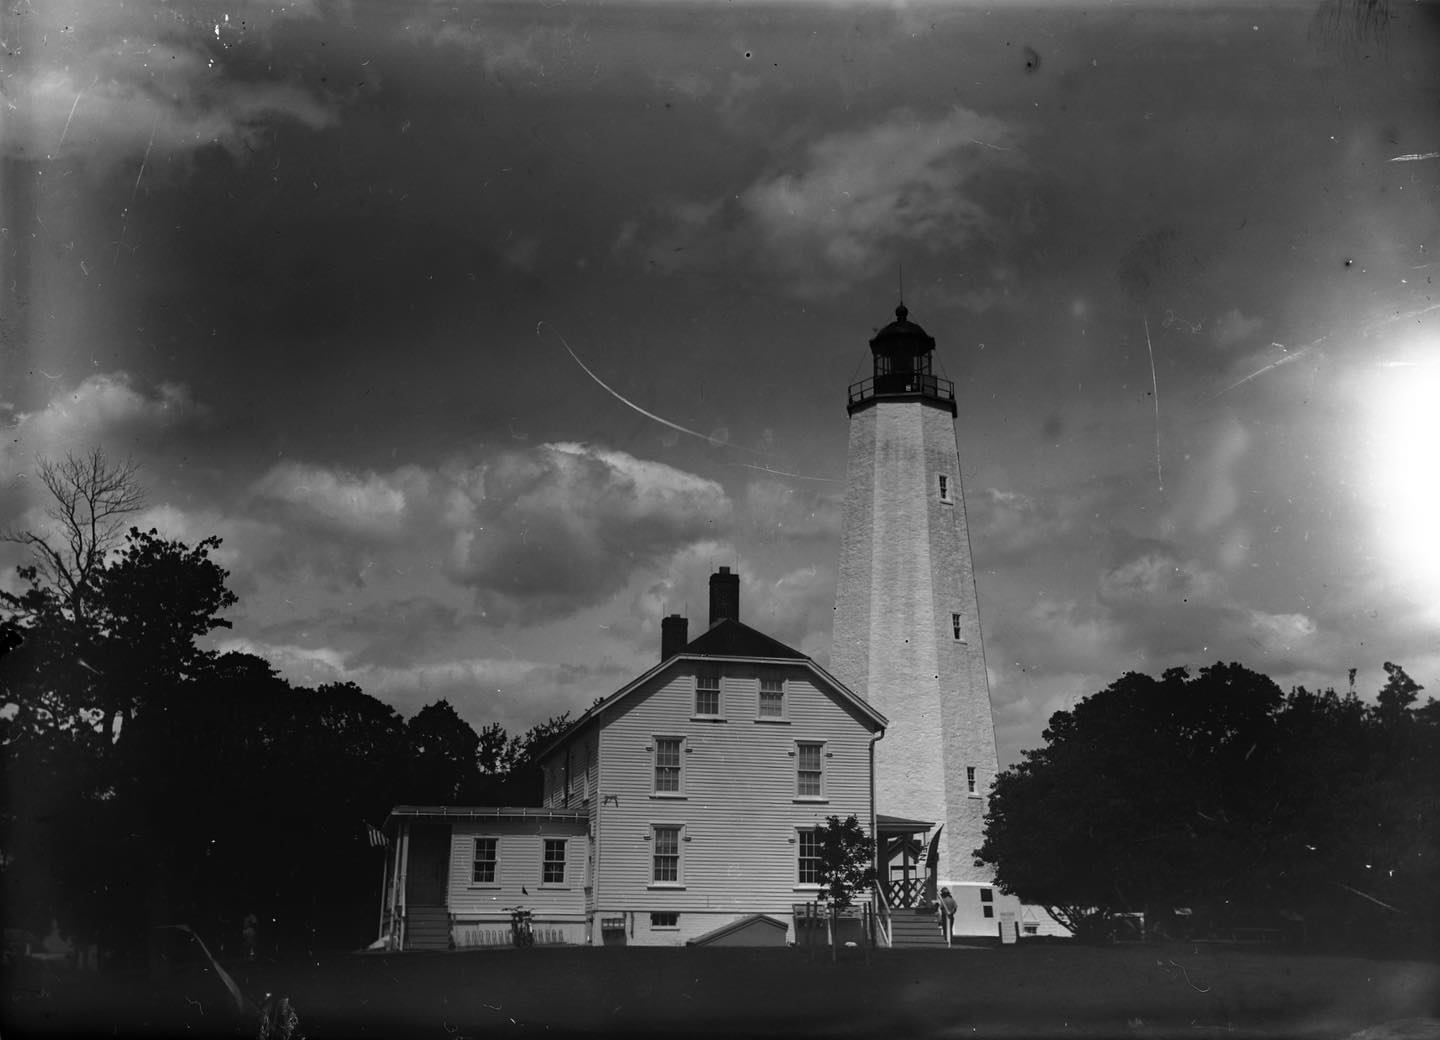 Sandy Hook Lighthouse. 
Shot on @pictoriographica Speed Plate (ISO 25) with my 1902 Century Studio No. 5. No-name Symmetric lens in a B&L pneumatic shutter, 1/5 second @ f/32. Developed by inspection in HC-110 Dilution B, 5 minutes or thereabouts. Really looking forward to the plate holders Jason and @chromacamera just completed a successful Kickstarter for so I (hopefully) donât get light leaks like in this shot from a vintage plate holder.  #dryplate #dryplatephotography #5x7 #5x7photography #film #filmphotography #filmphotographic #largeformat